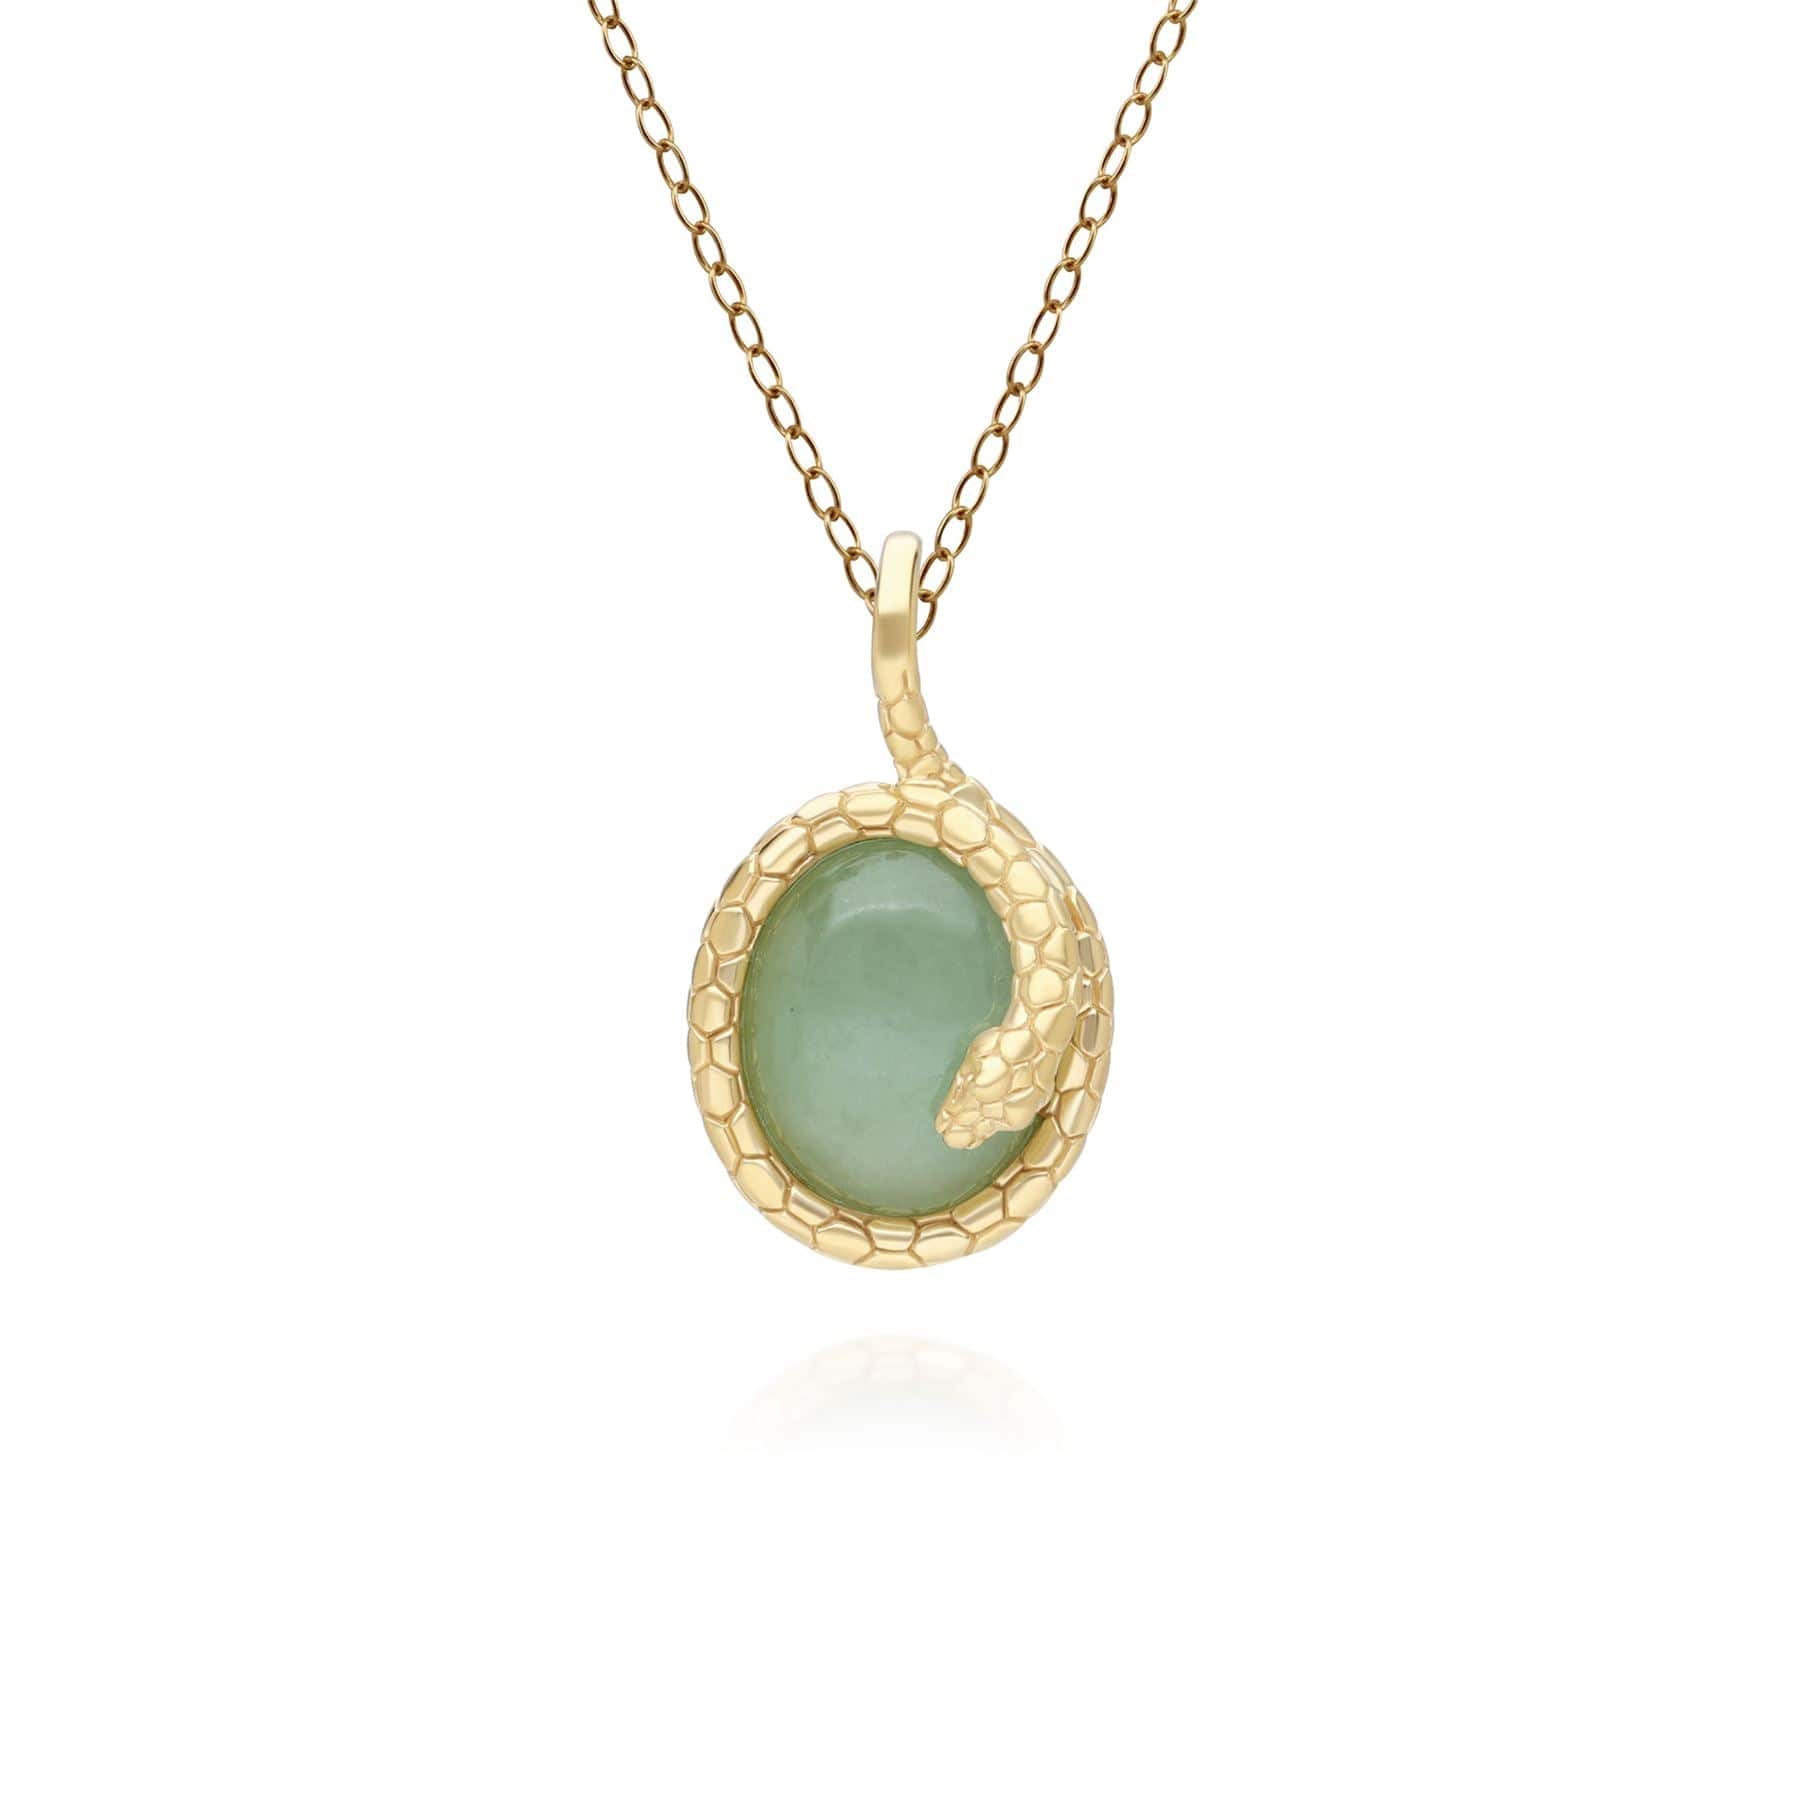 ECFEW™ OVAL JADE WINDING SNAKE PENDANT NECKLACE IN GOLD PLATED STERLING SILVER